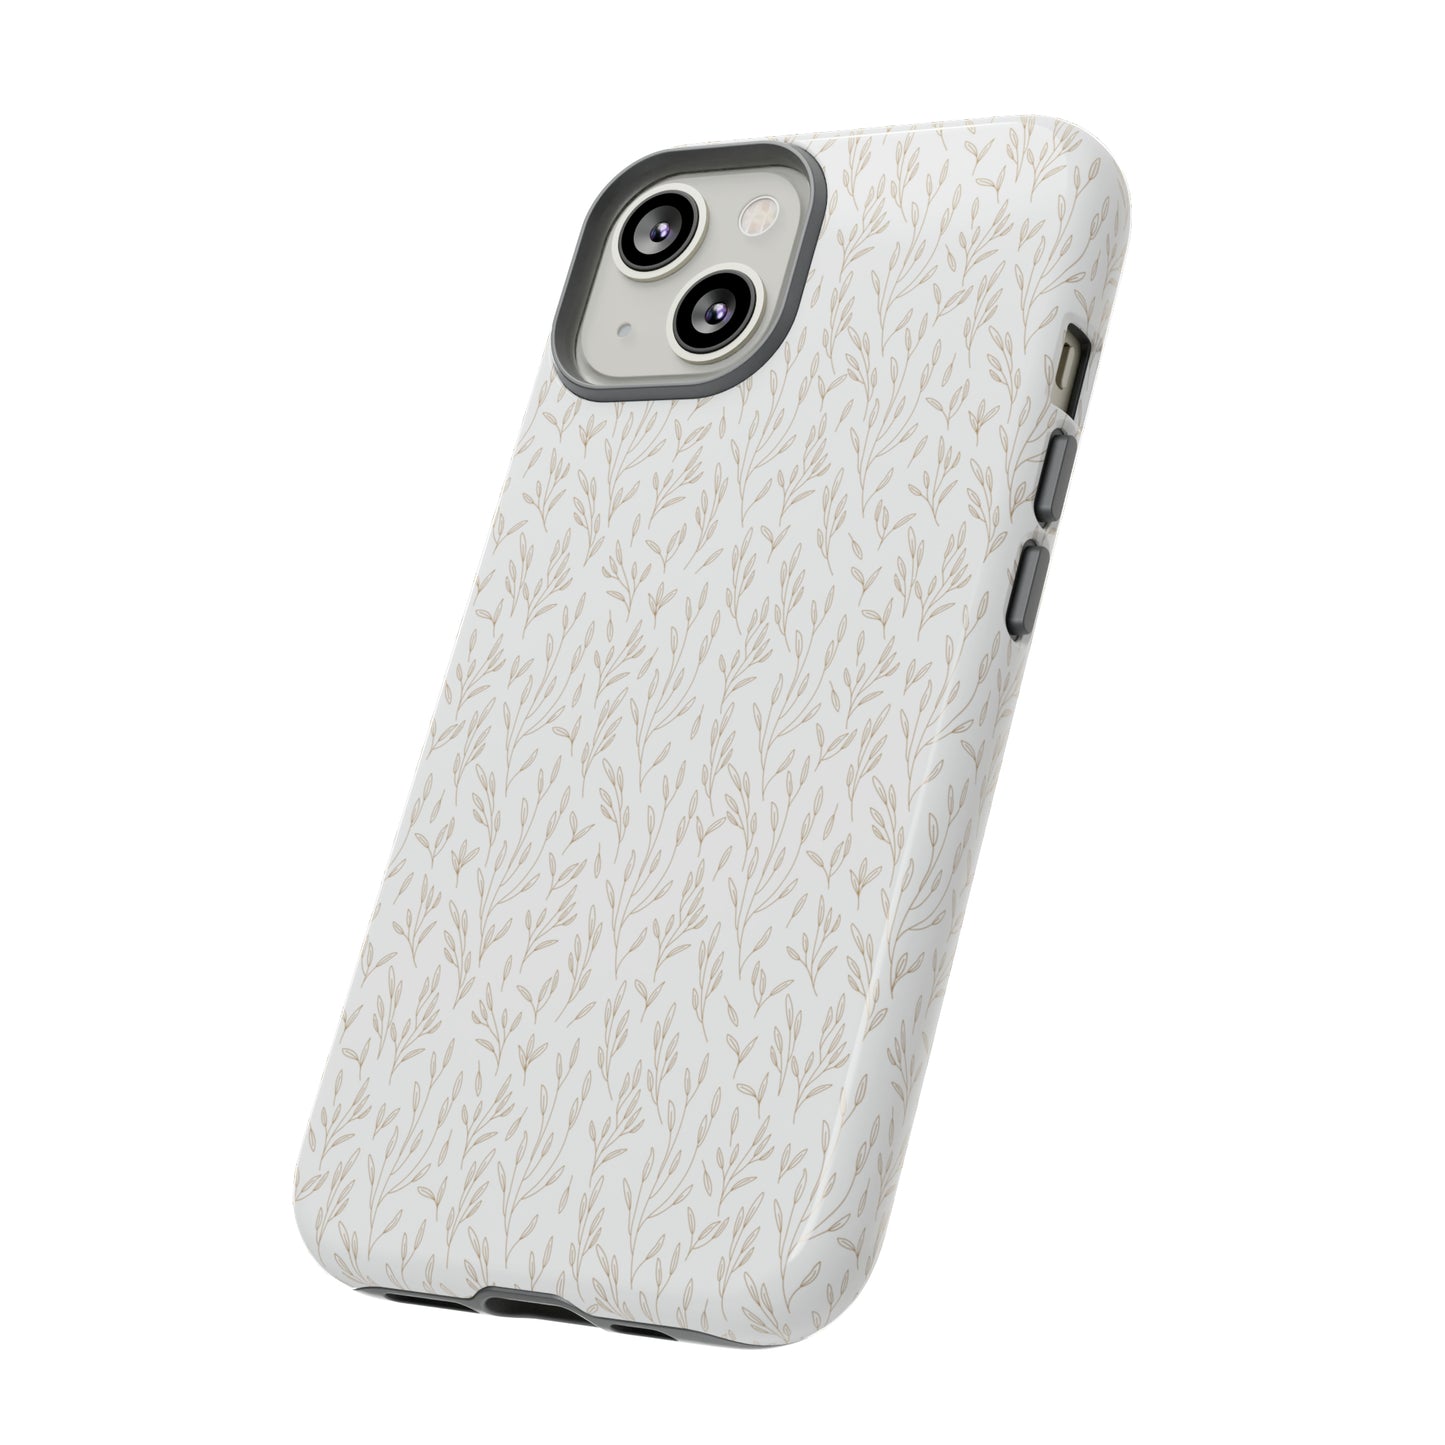 Double-Layer Tough Case for the Delicately Bold